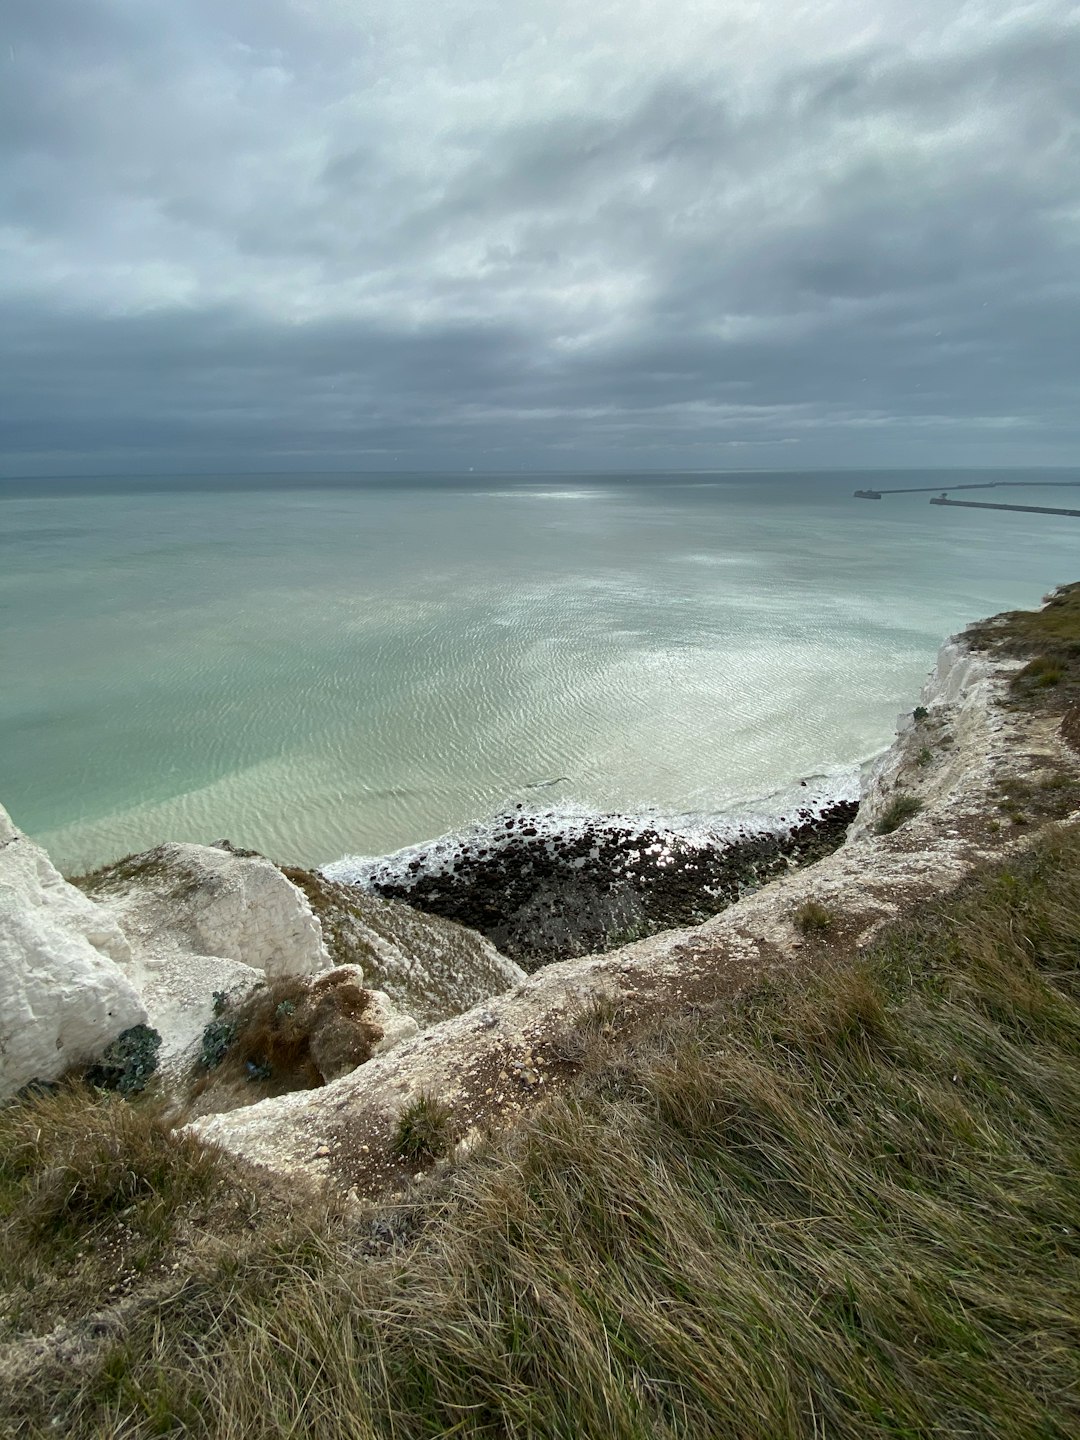 travelers stories about Beach in The White Cliffs of Dover, United Kingdom